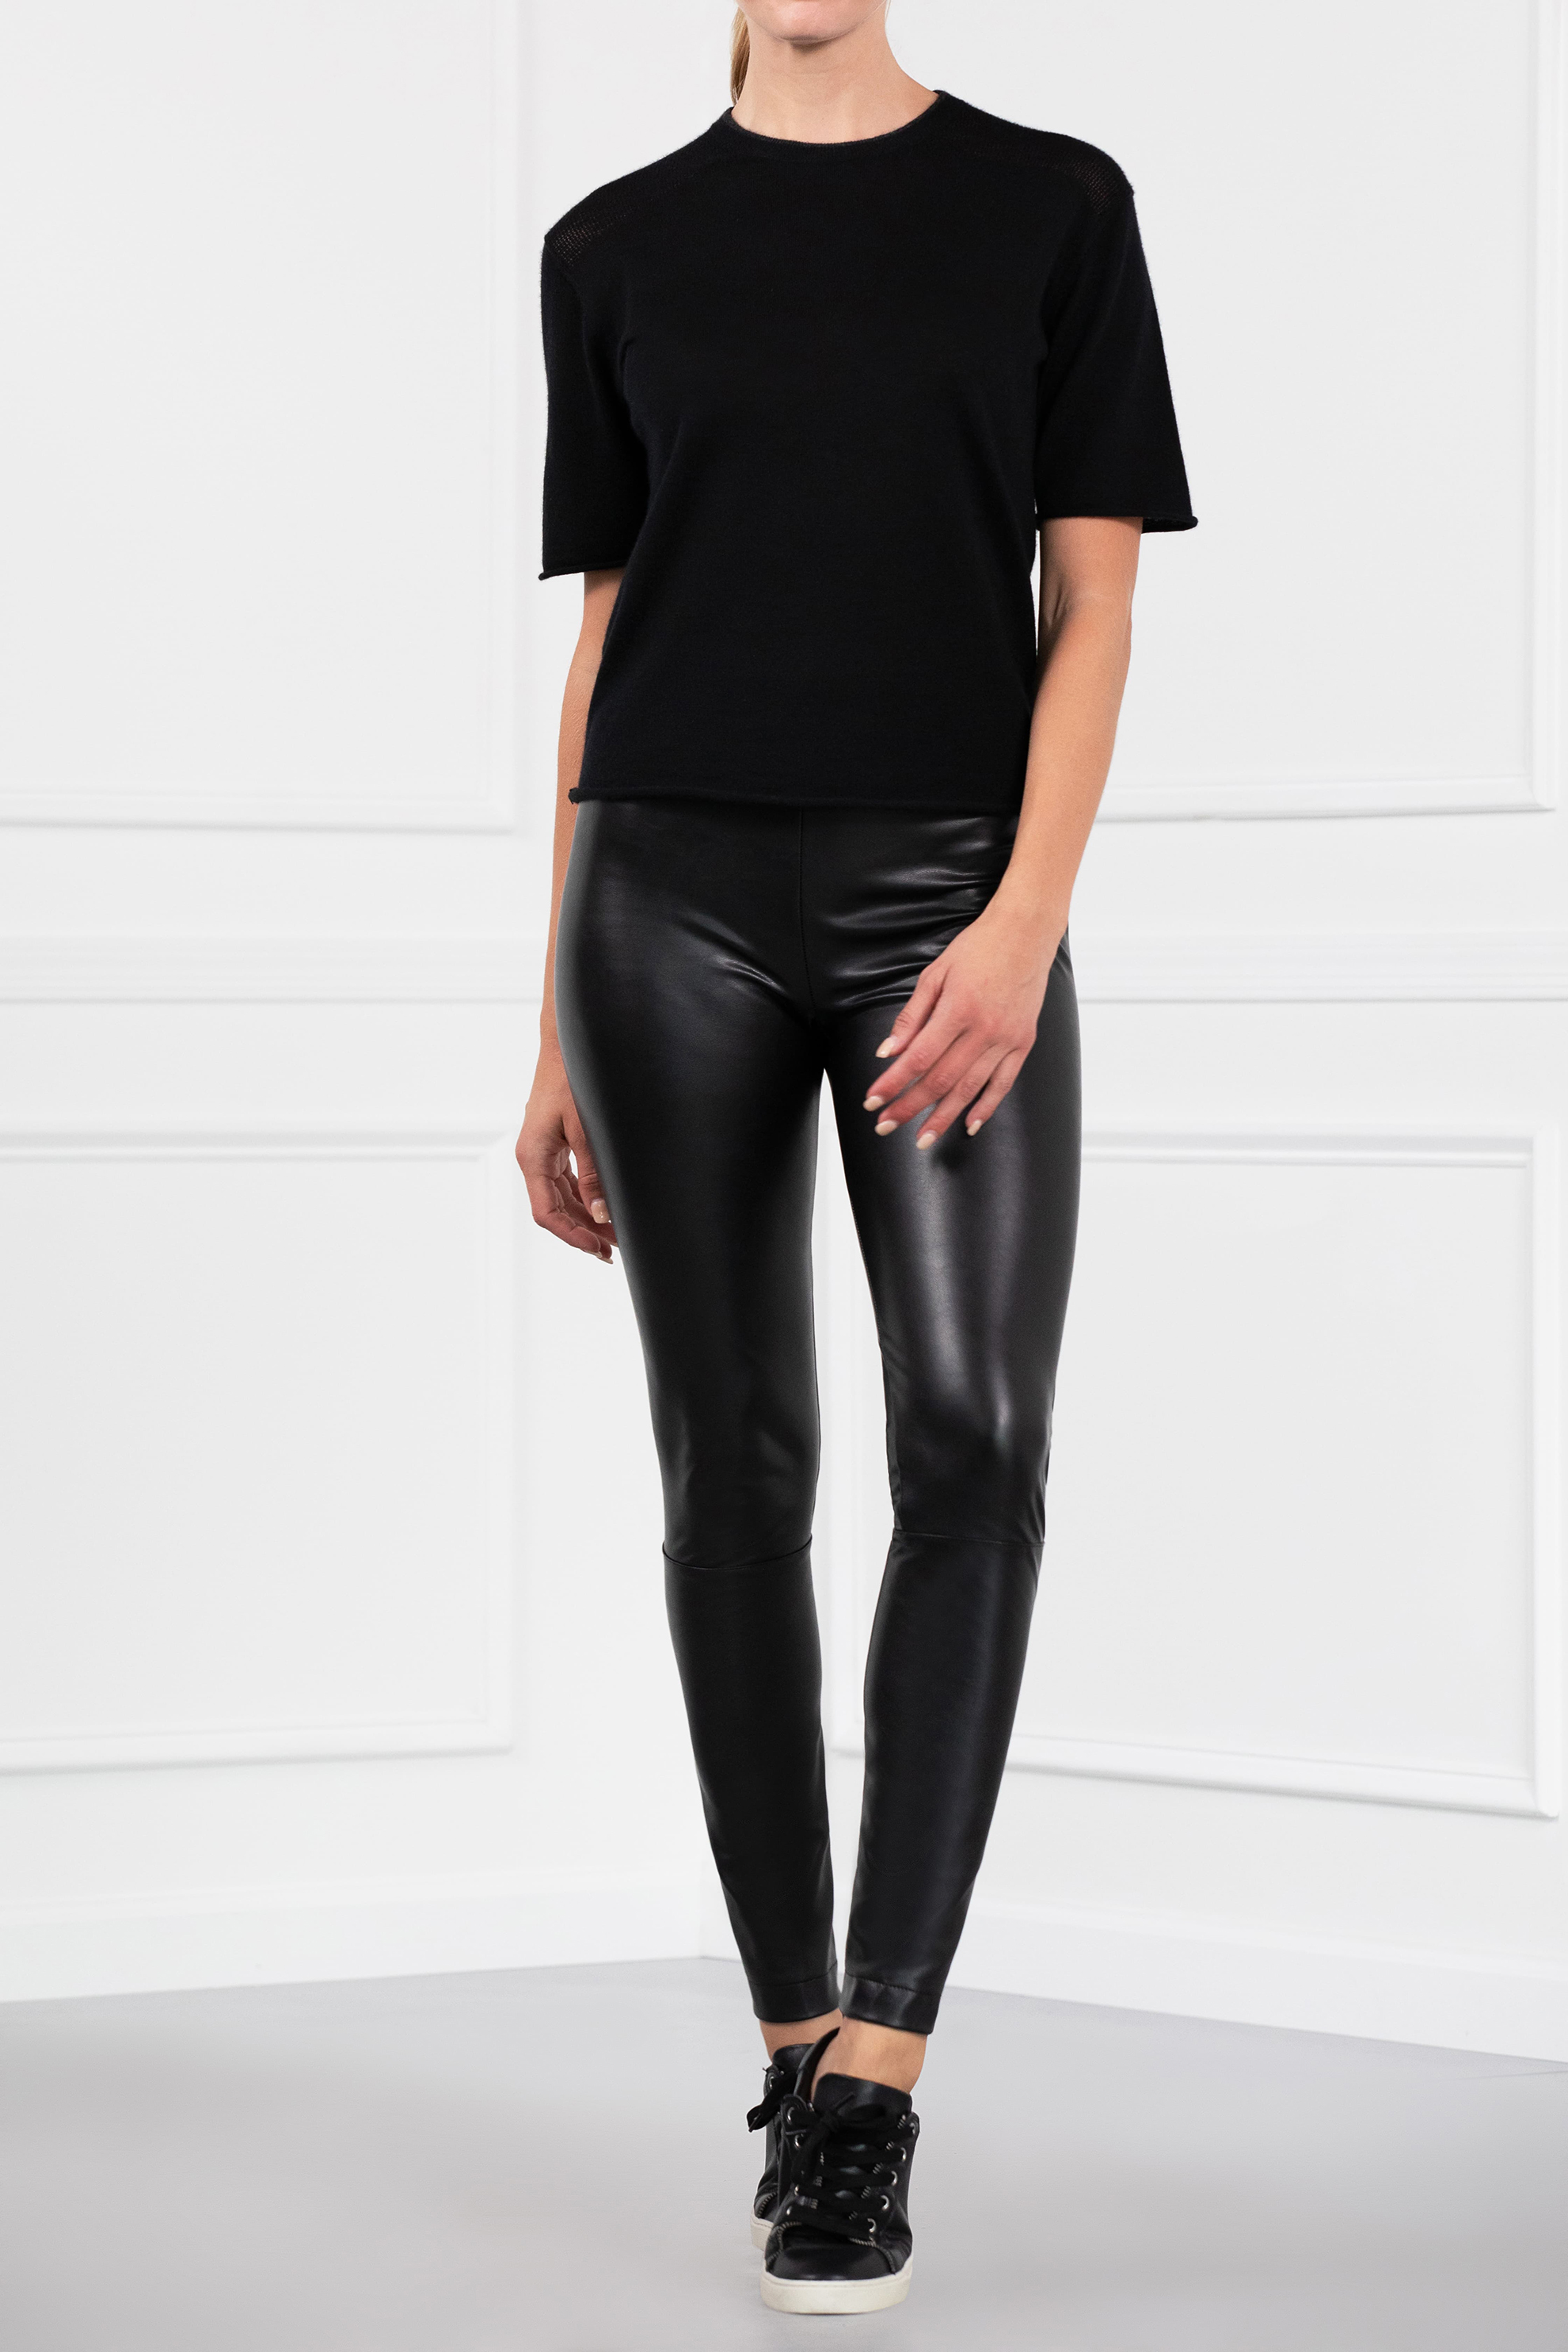 WOMENS-CASHMERE-CLASSIC-TEE-AND-ECO-LEATHER-LEGGINGS-BLACK-FRONT-HiRes.jpg